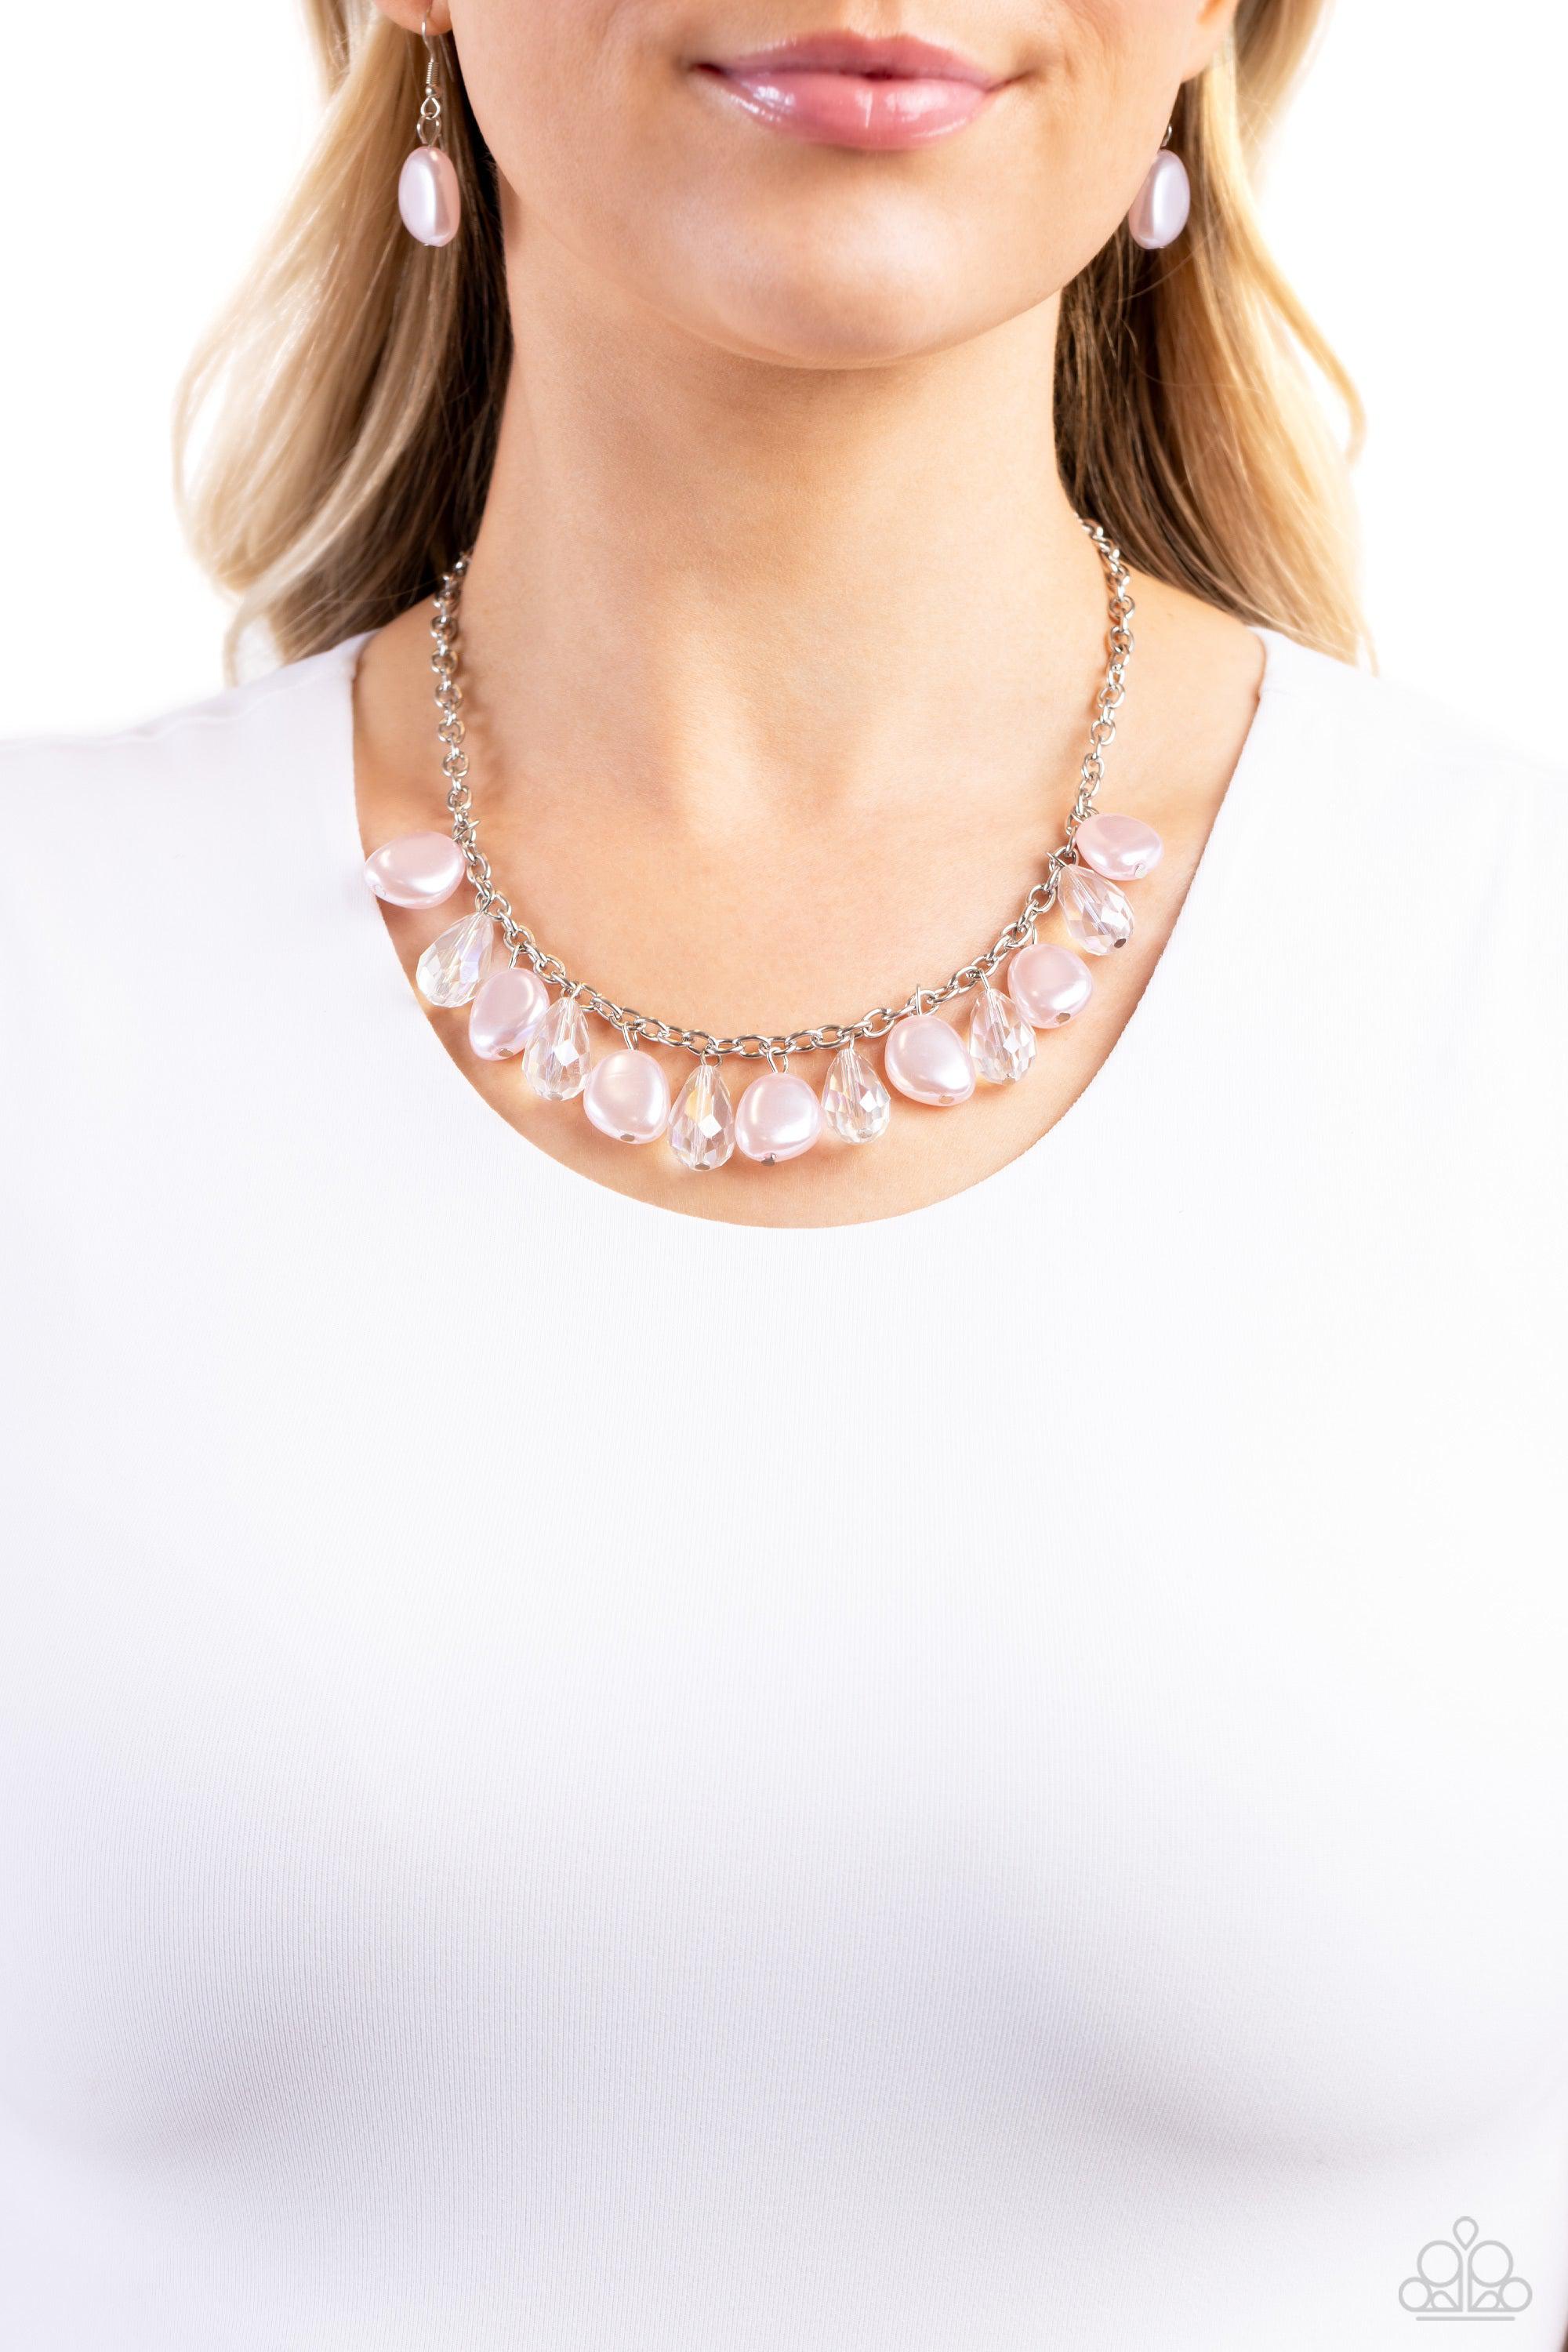 Welcome to BALL Street Pink Necklace - Paparazzi Accessories- lightbox - CarasShop.com - $5 Jewelry by Cara Jewels